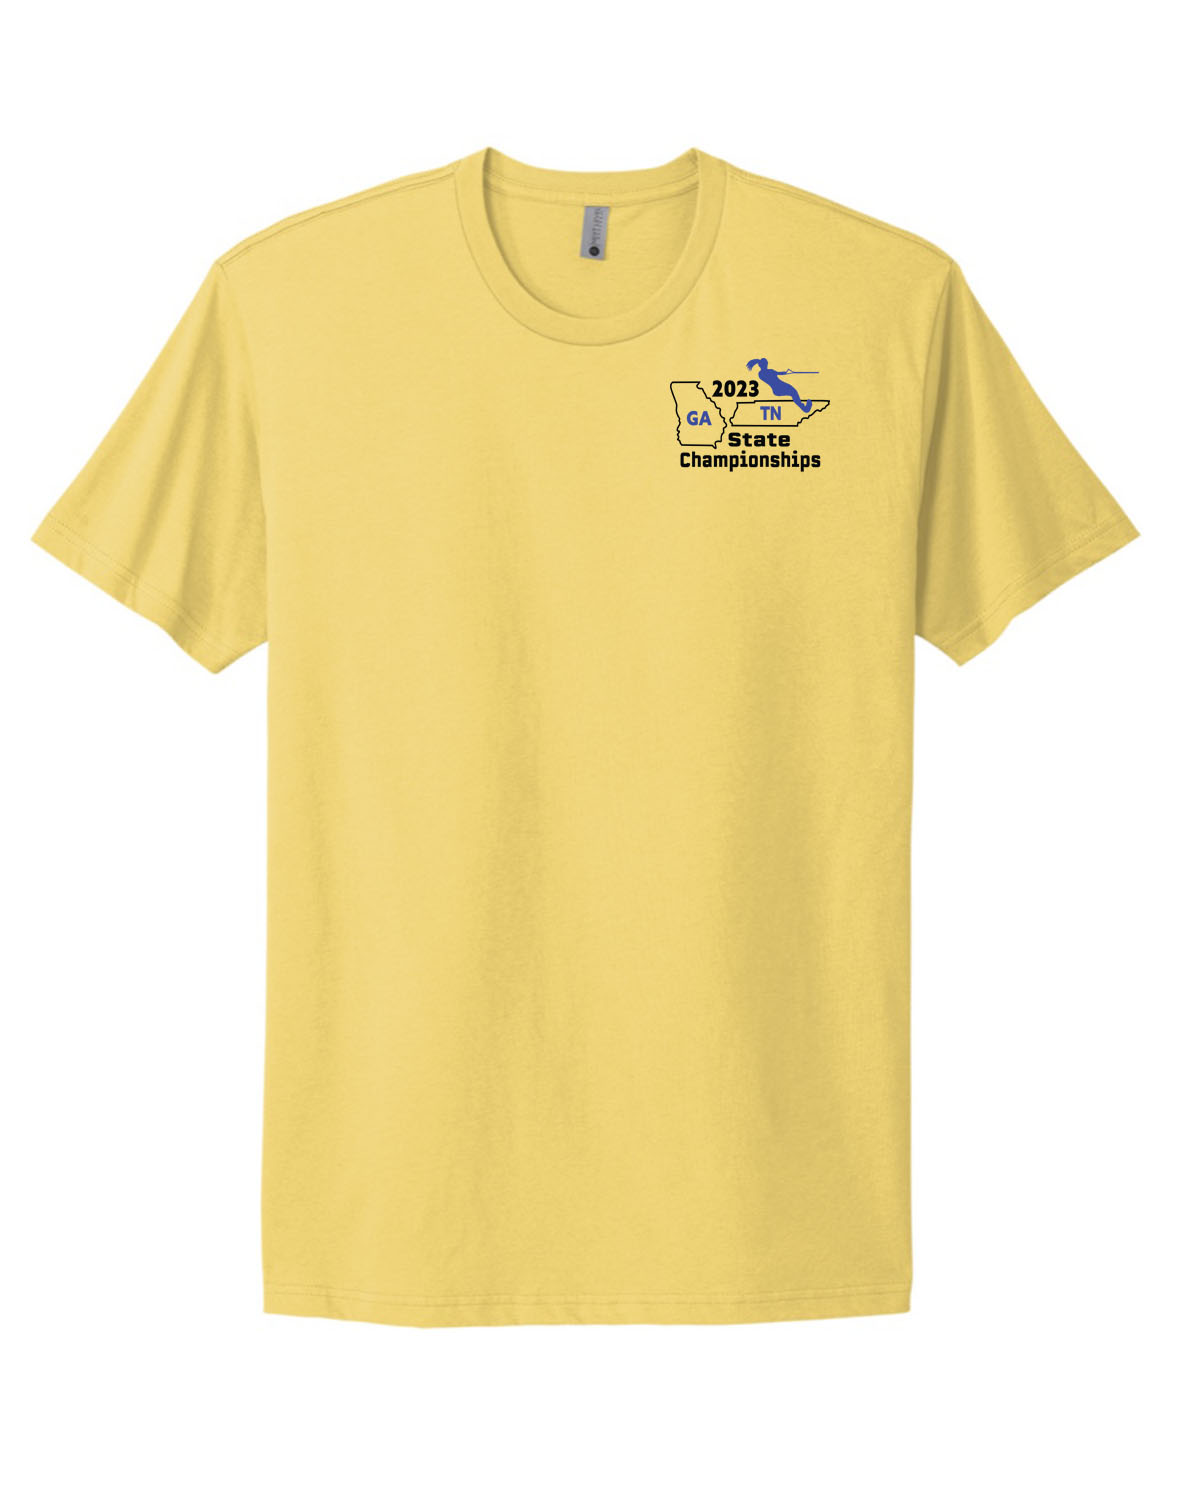 t-shirt yellow front